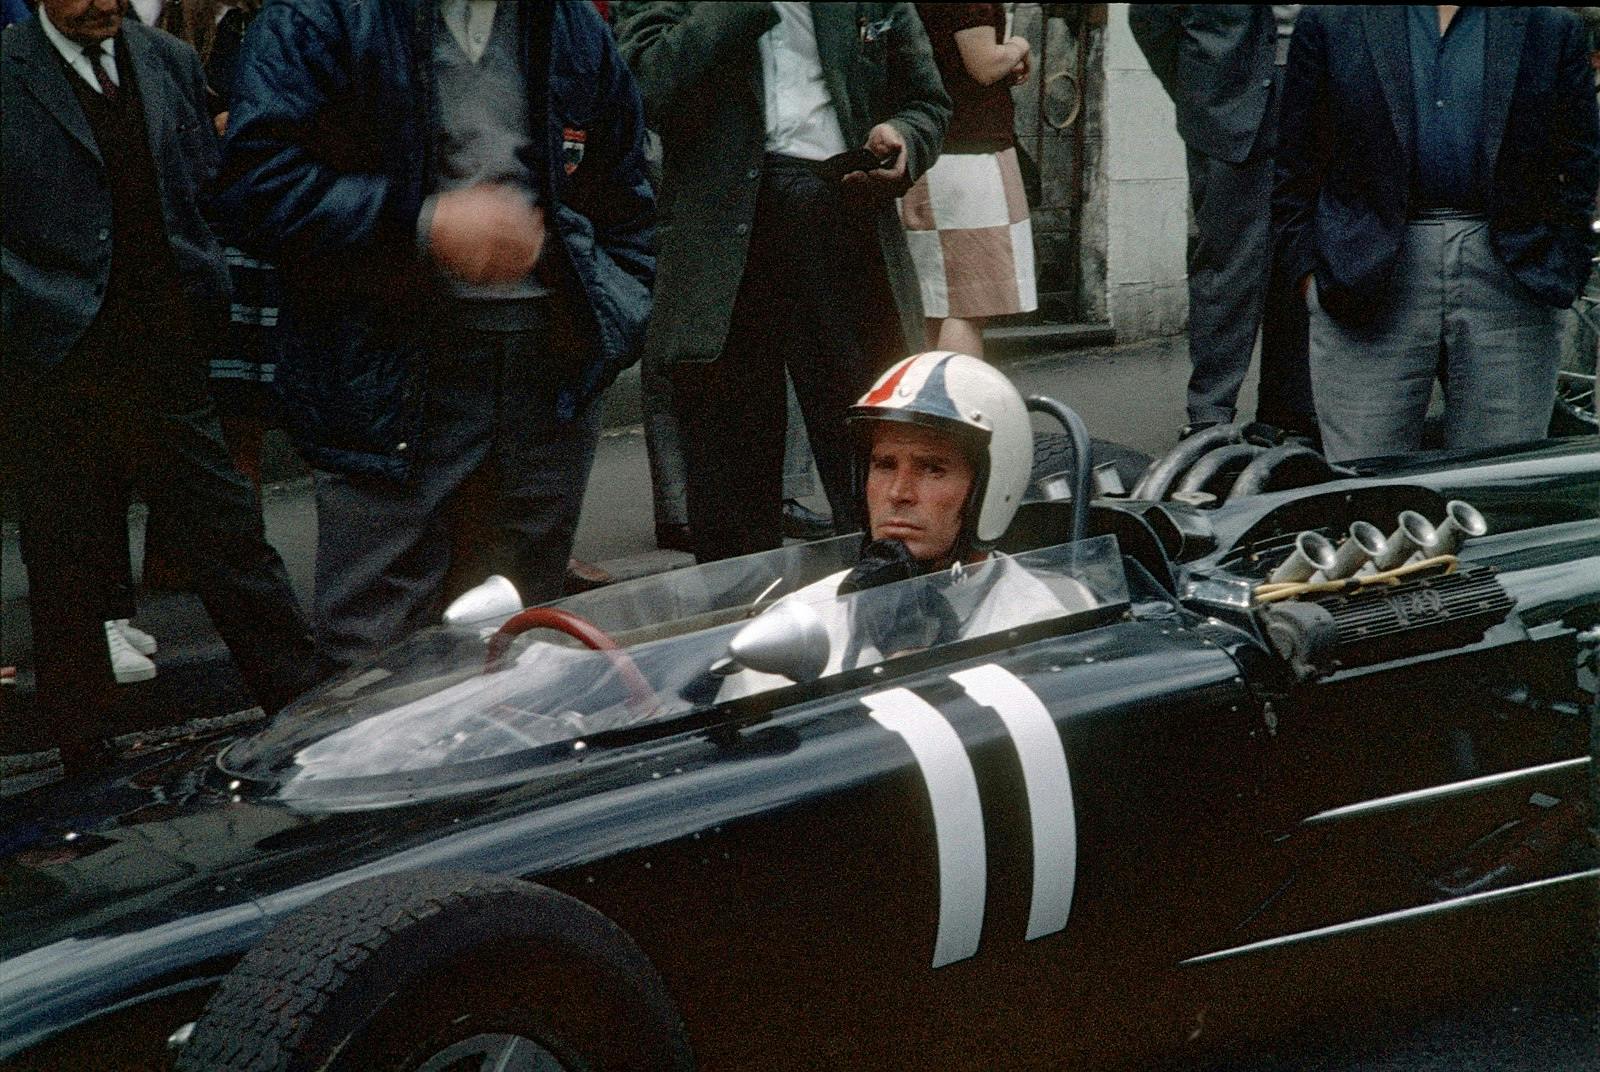 American Public dom actor James Garner during filming of Grand Prix 1966 in Royat near the Charade circuit. Public domain.